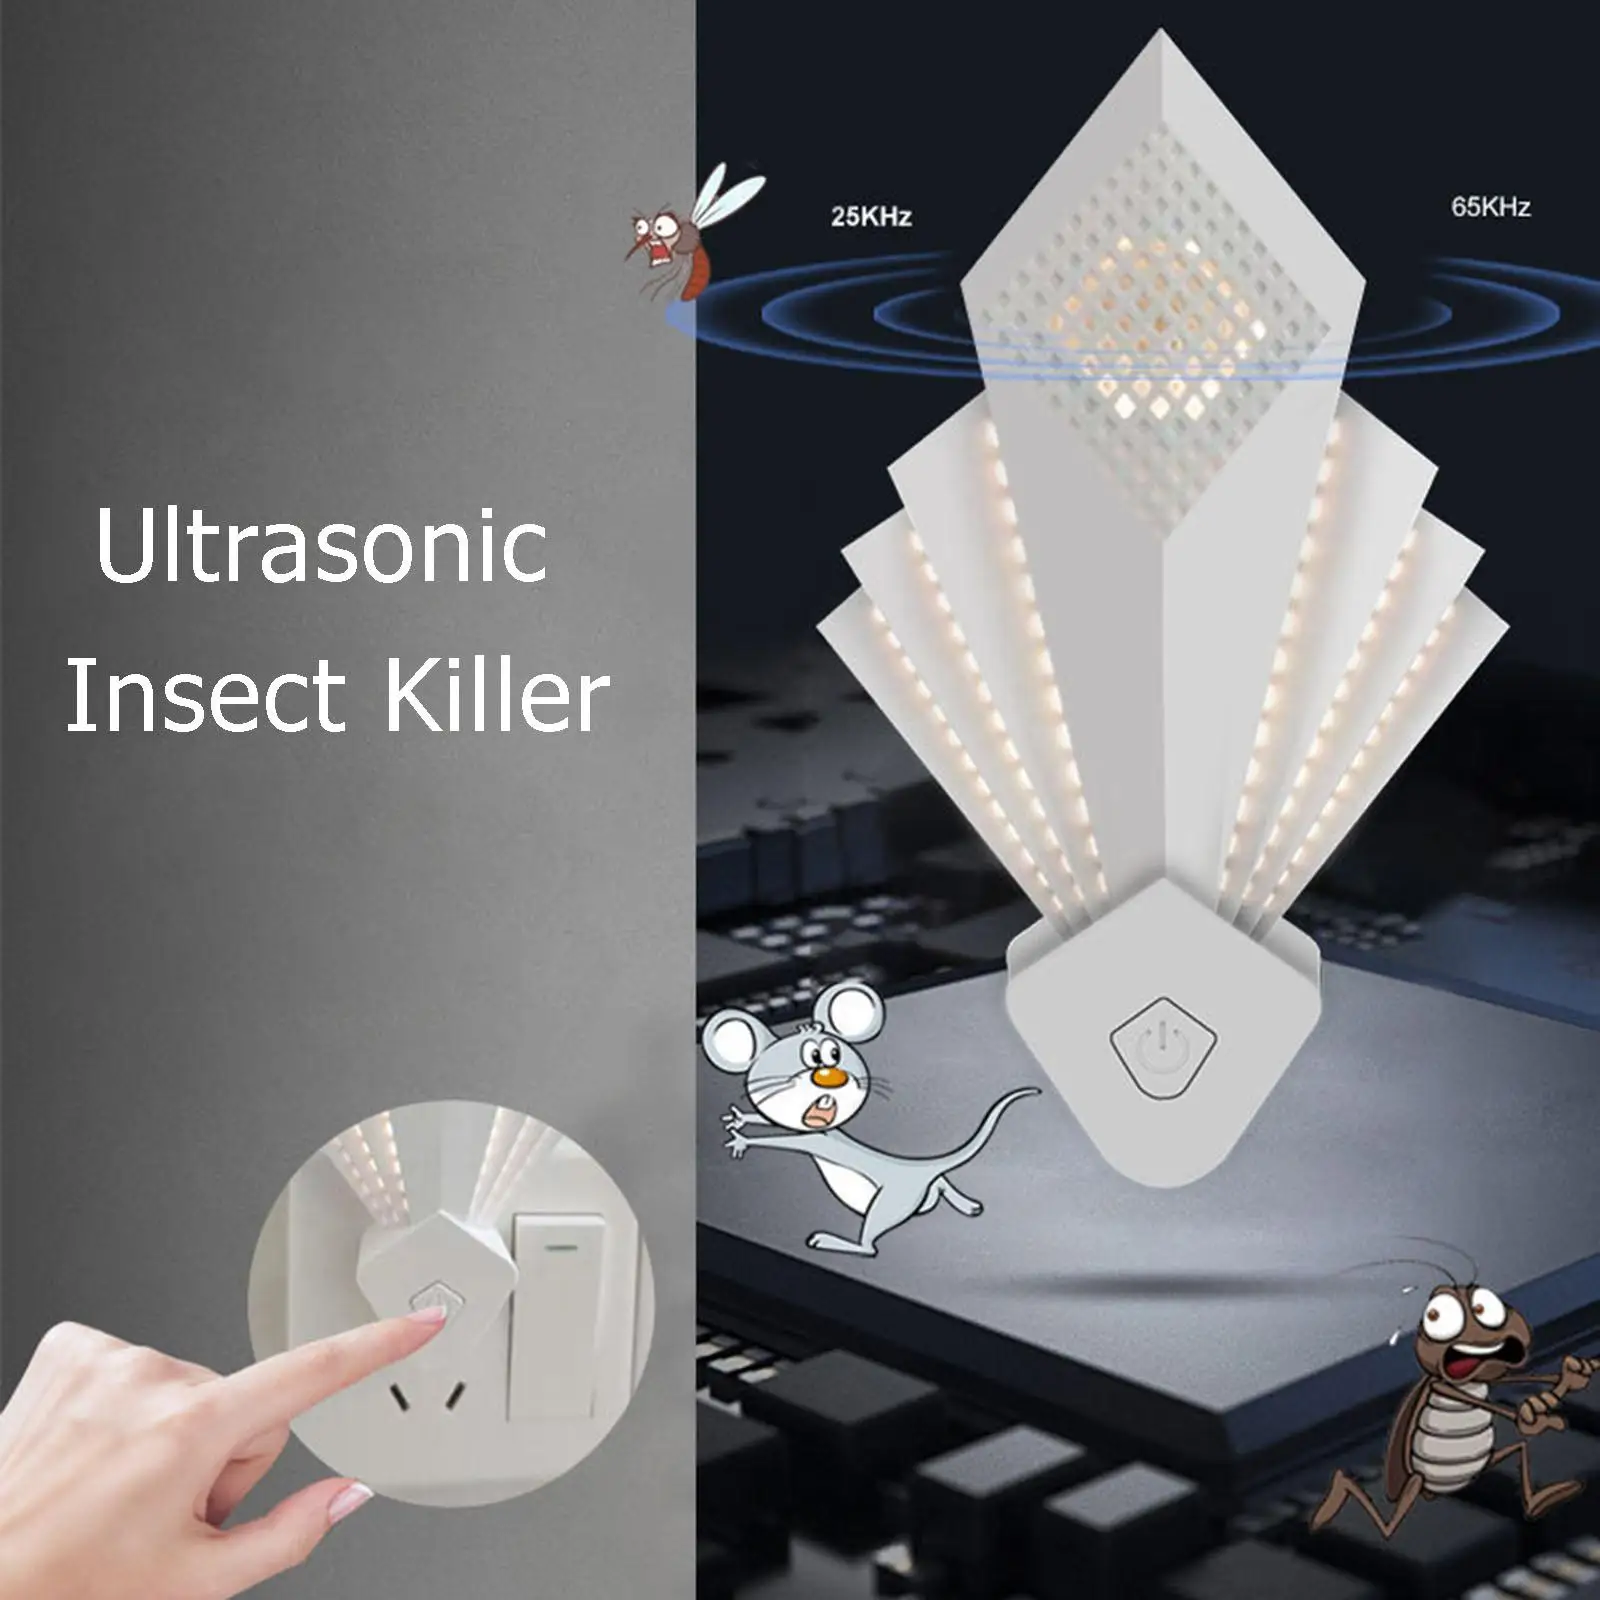 Ultrasonic Pest Repeller Automatic Electronic Anti-Fall White Dust Mite Killer for Home Bedroom Offices Indoor Outdoor Insects